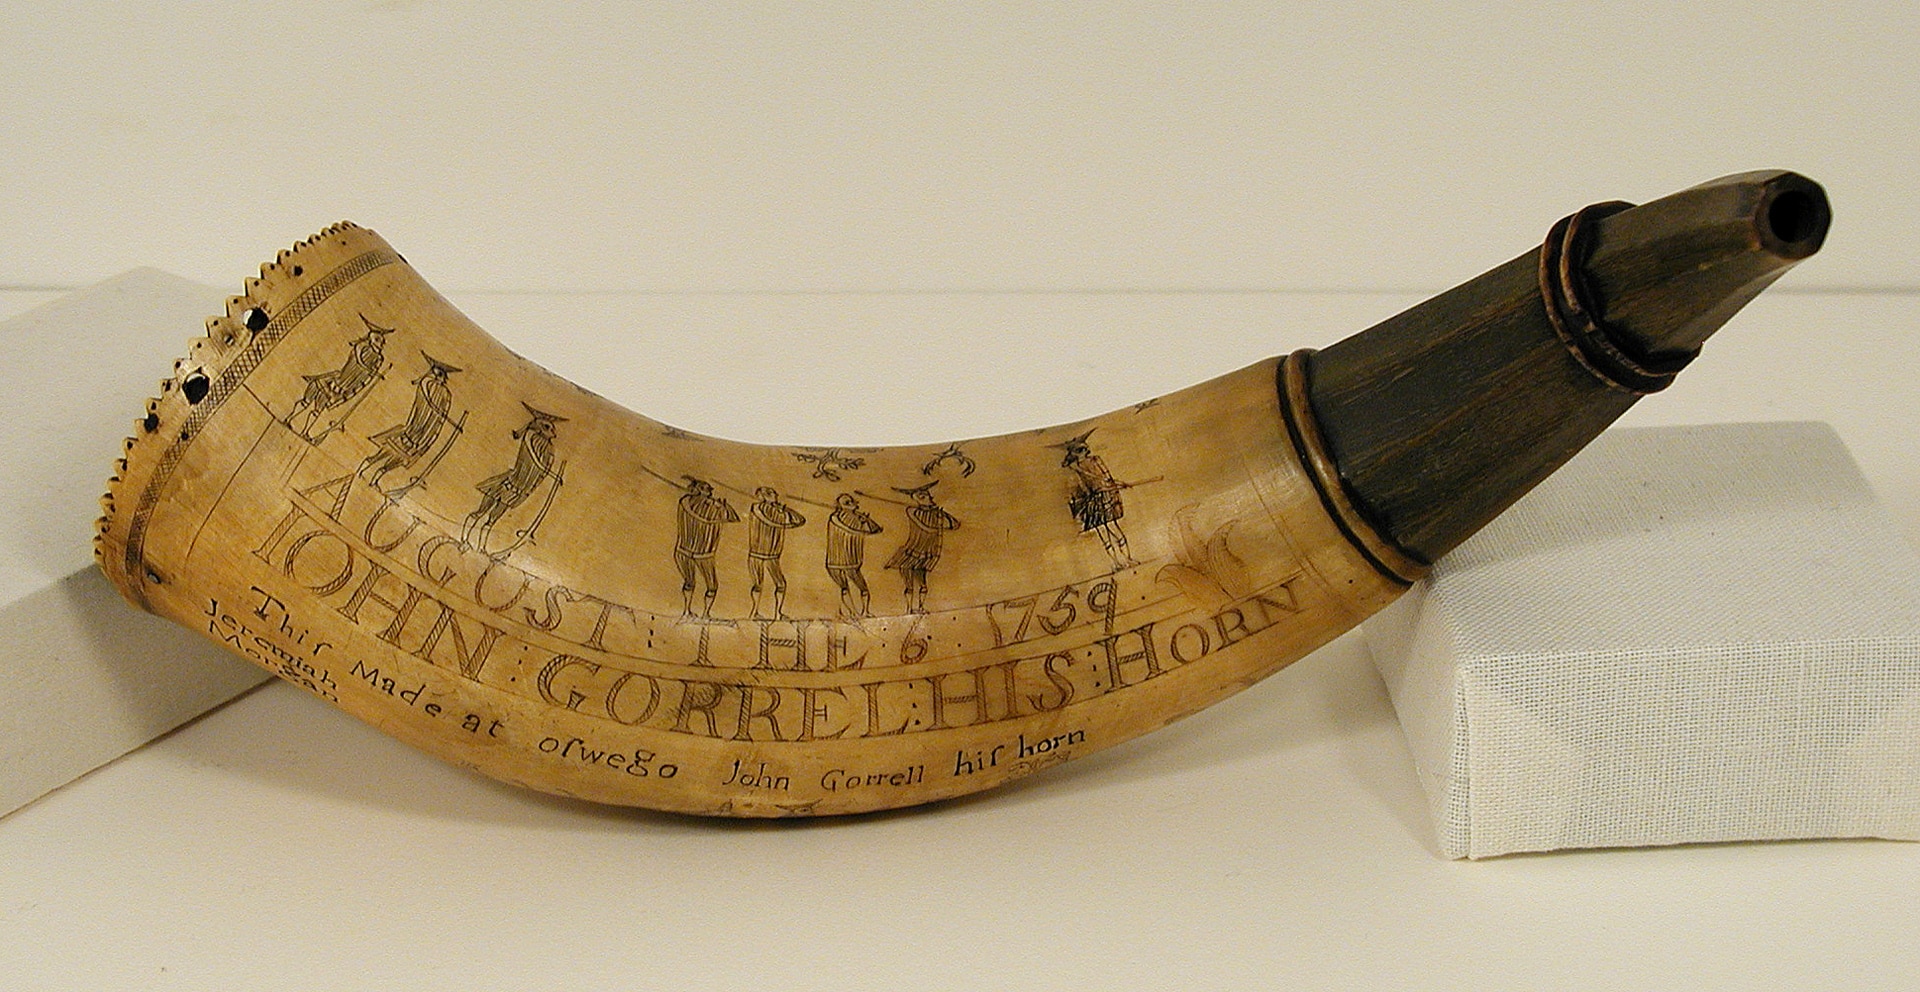 a horn with figures and the text JOHN GORRELL HIS HORN etched into it